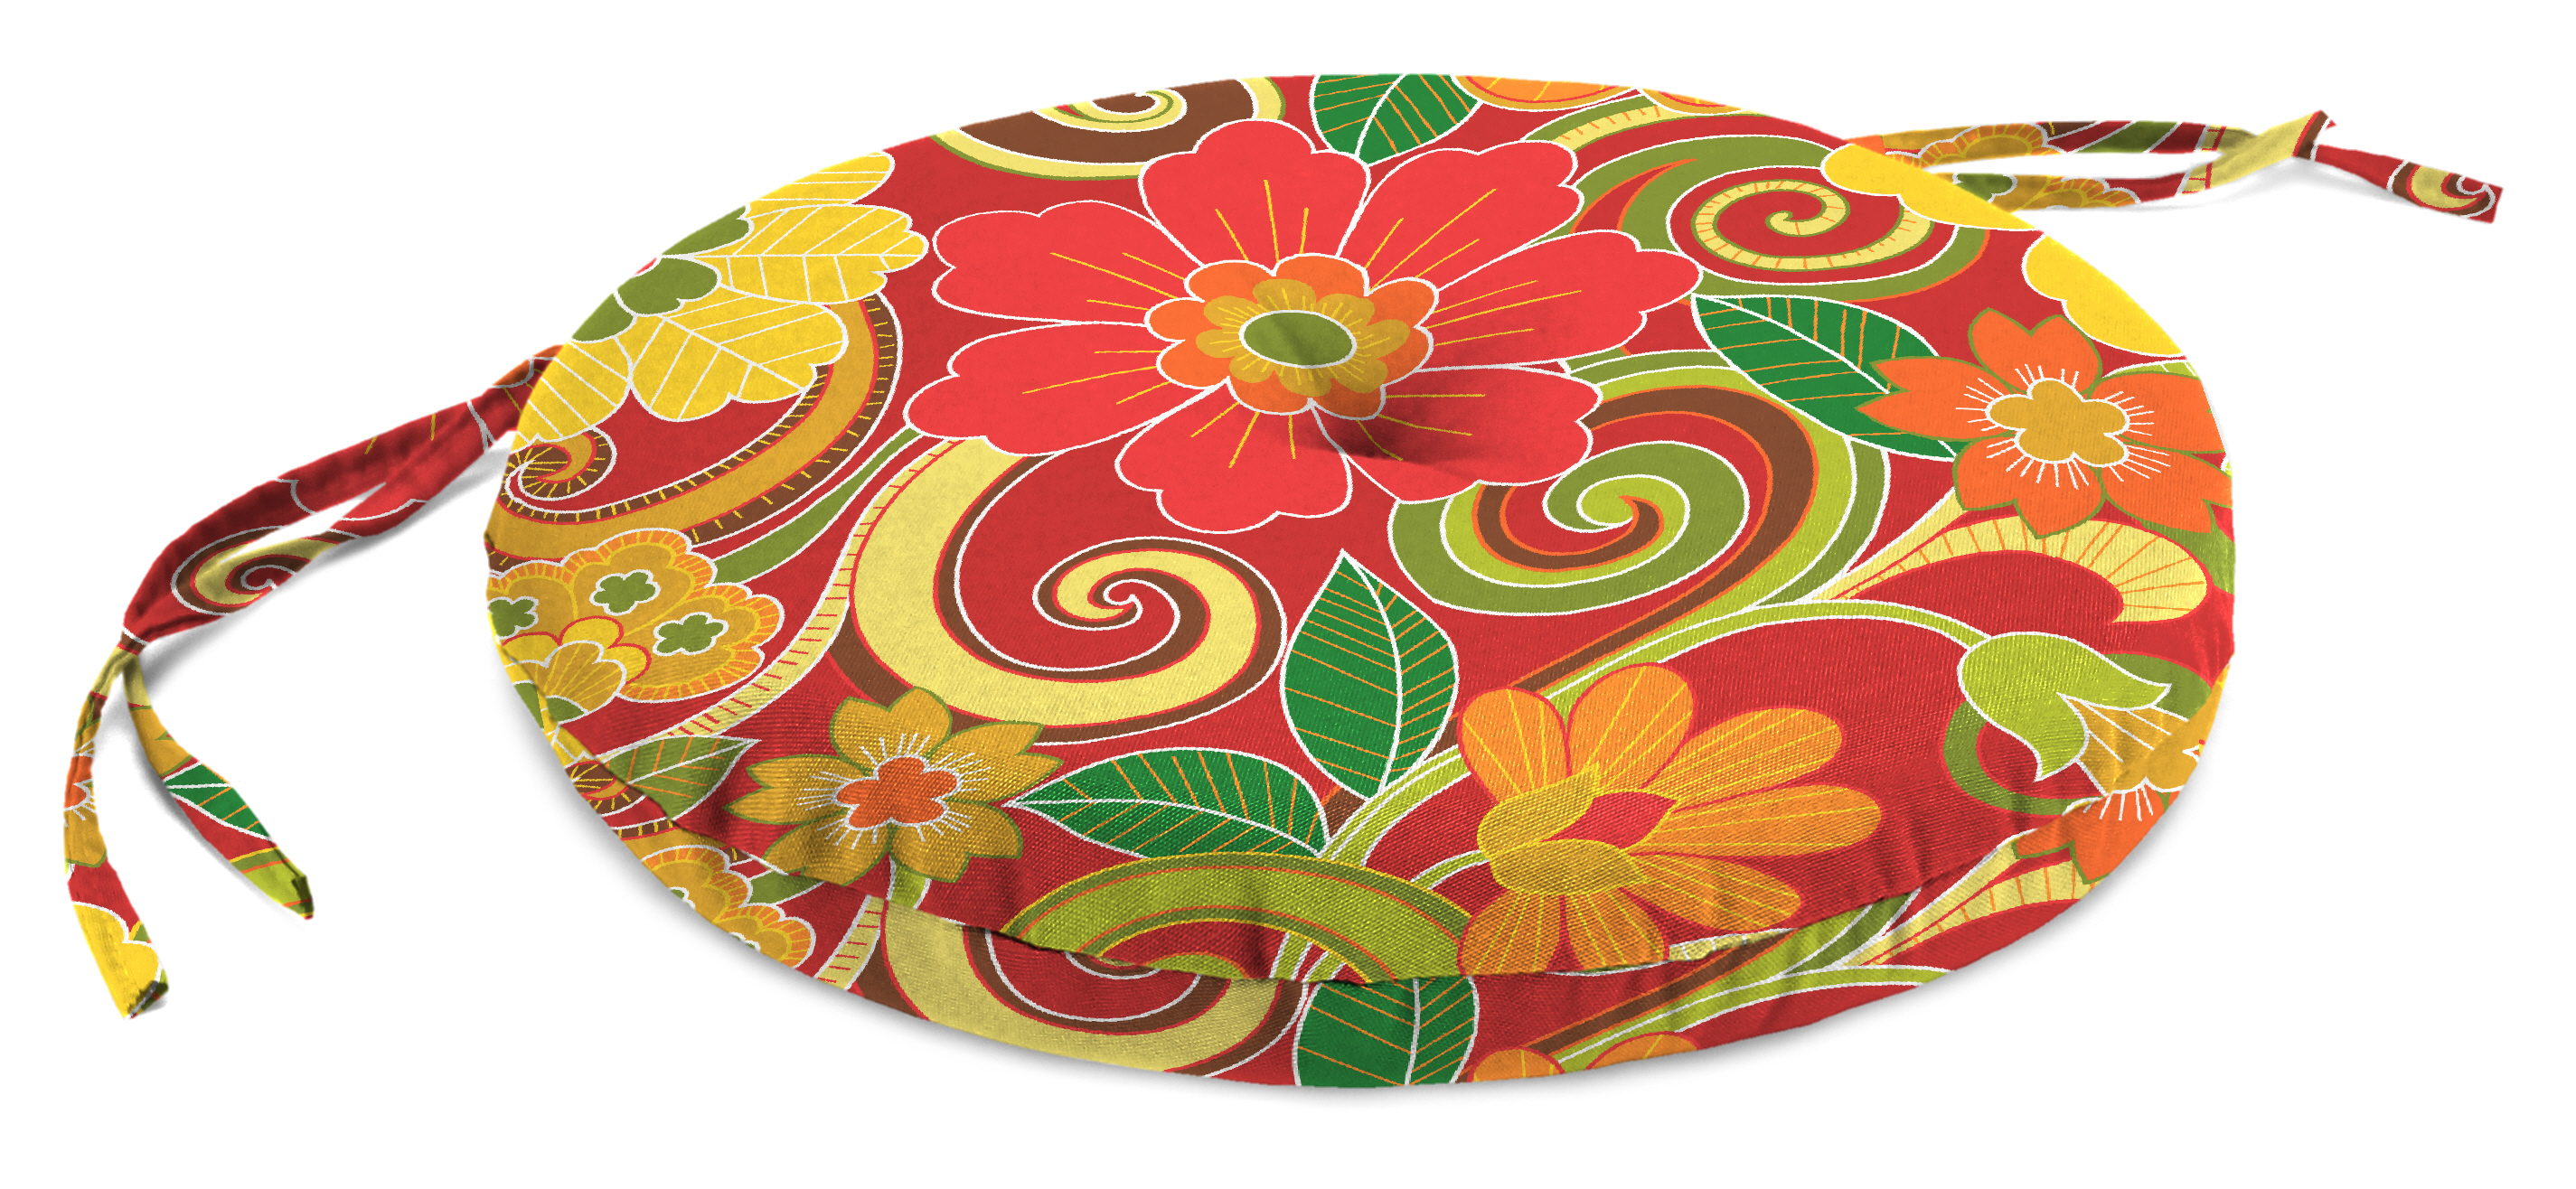 15" Round Bistro Patio Chair Cushion in Rollingmead Sangria